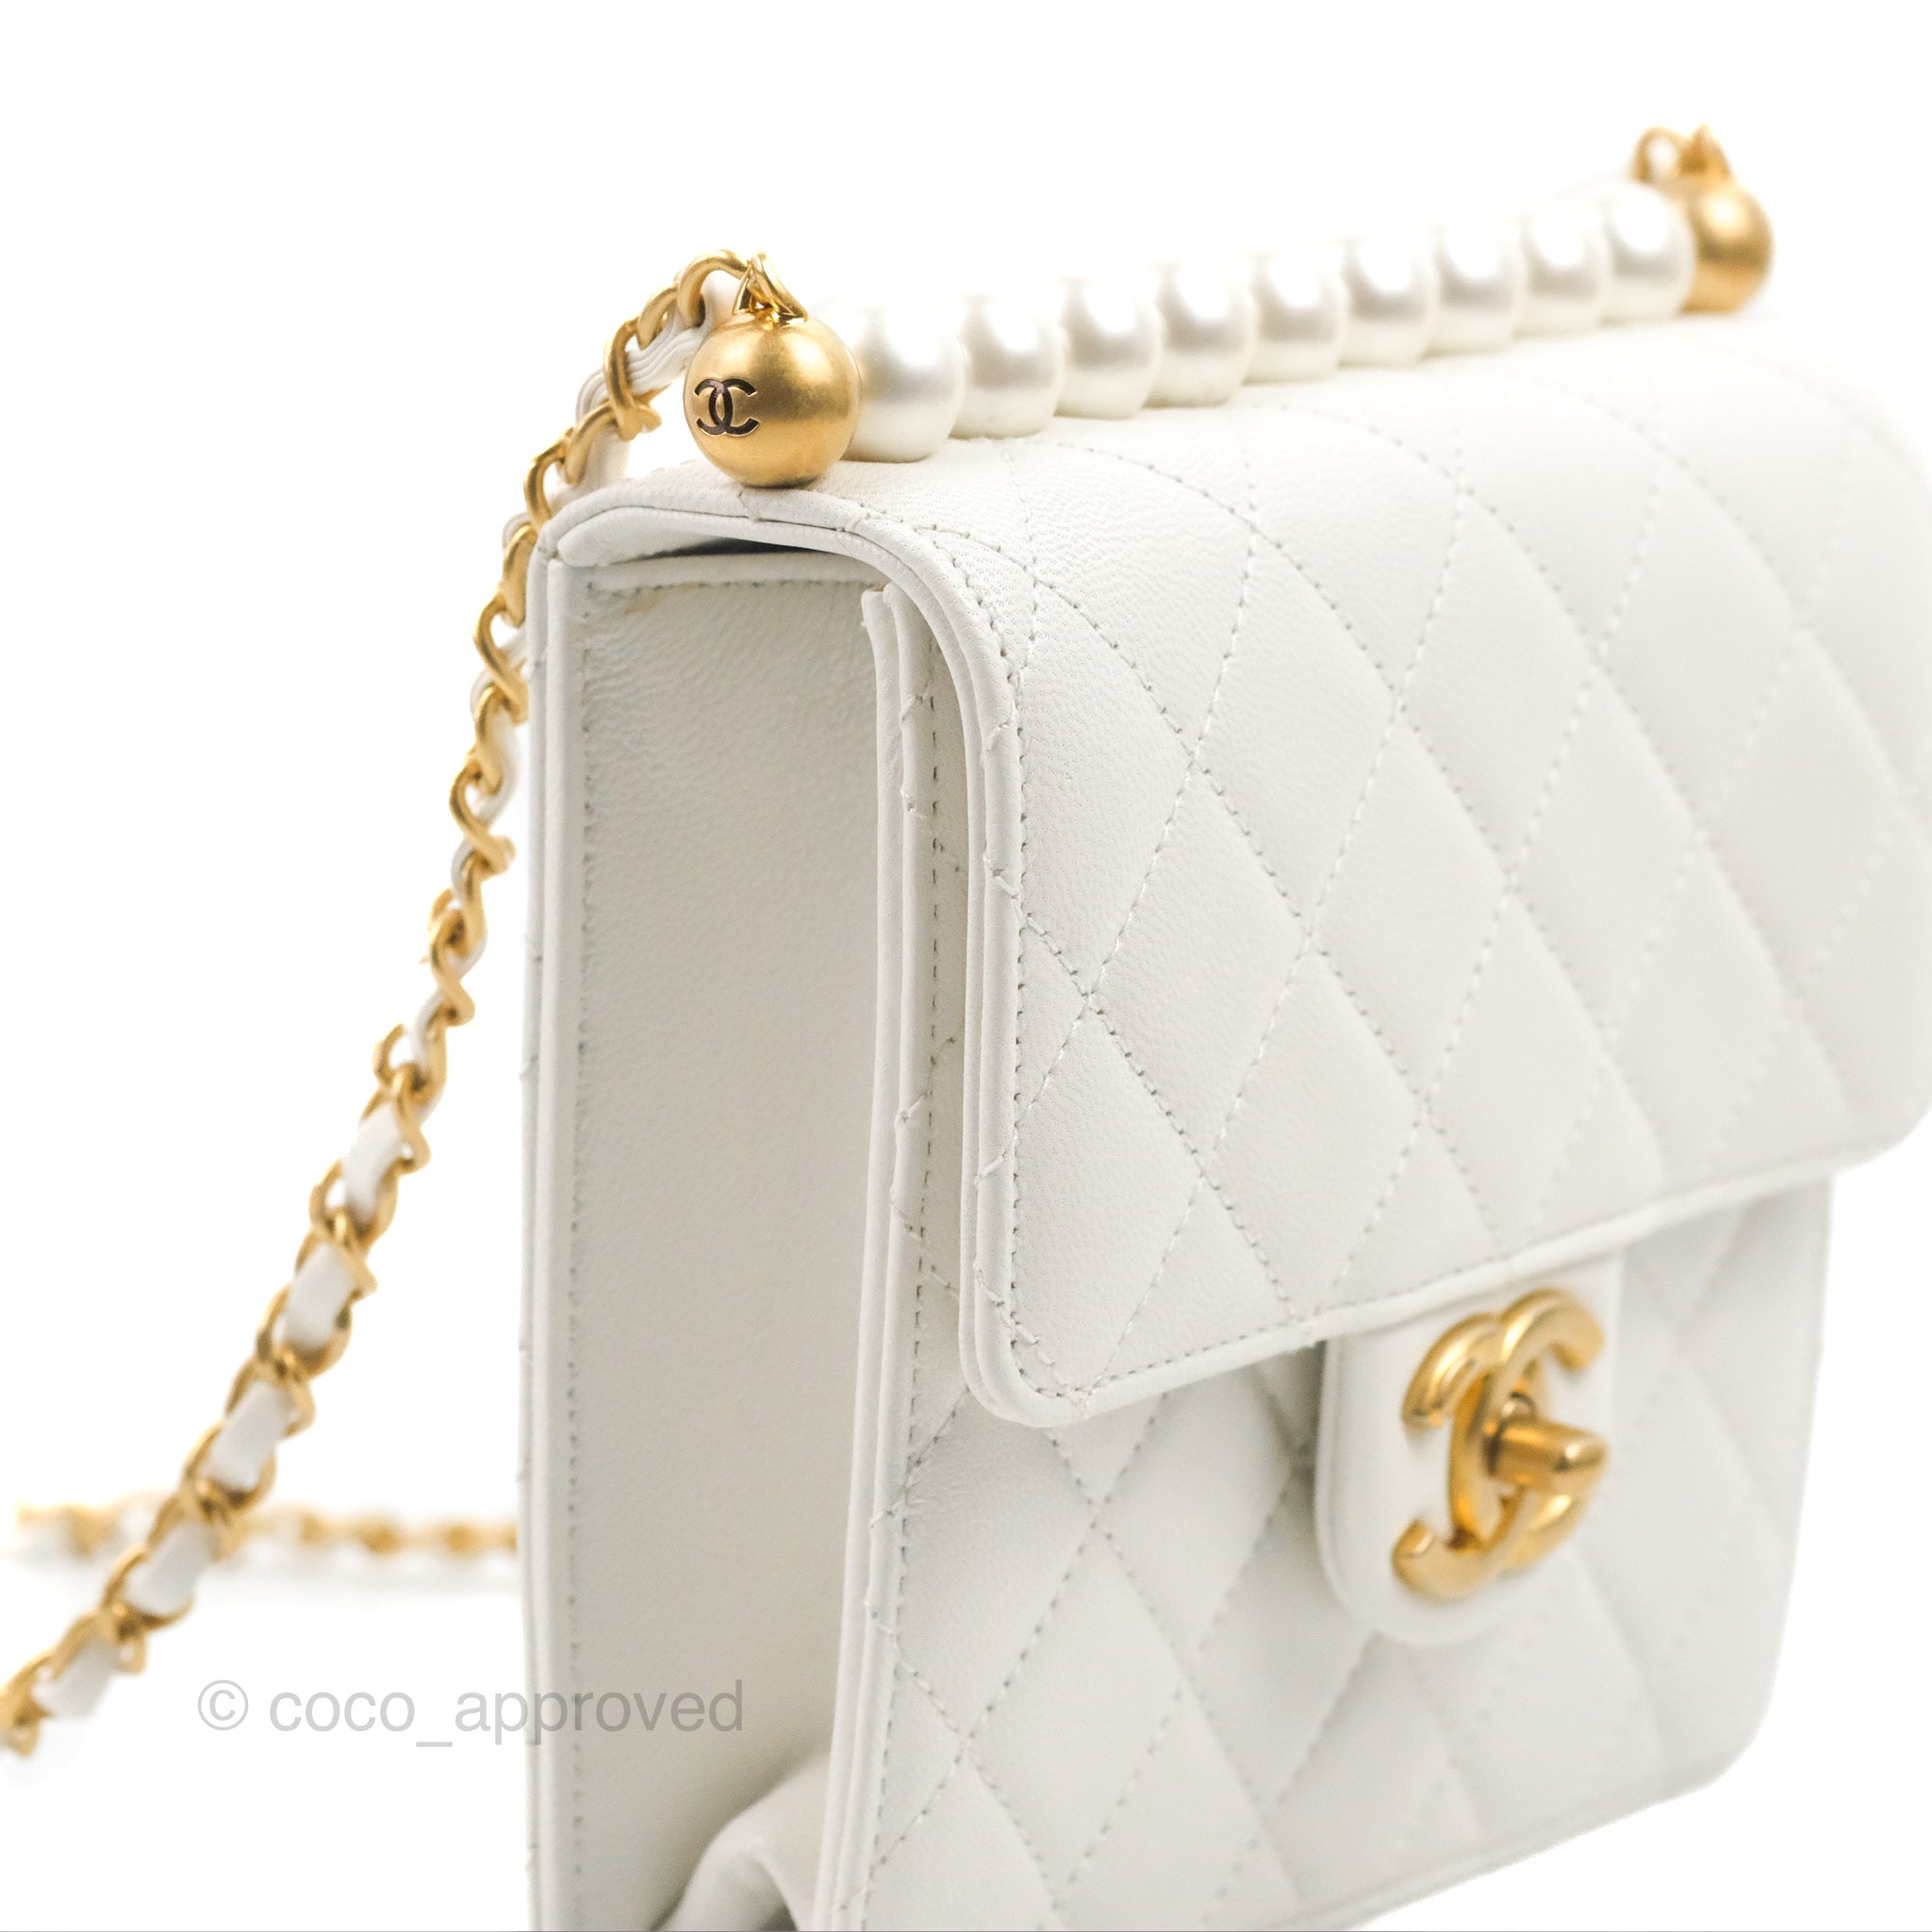 Chanel Small Goatskin Quilted Chic Pearls Flap Bag 